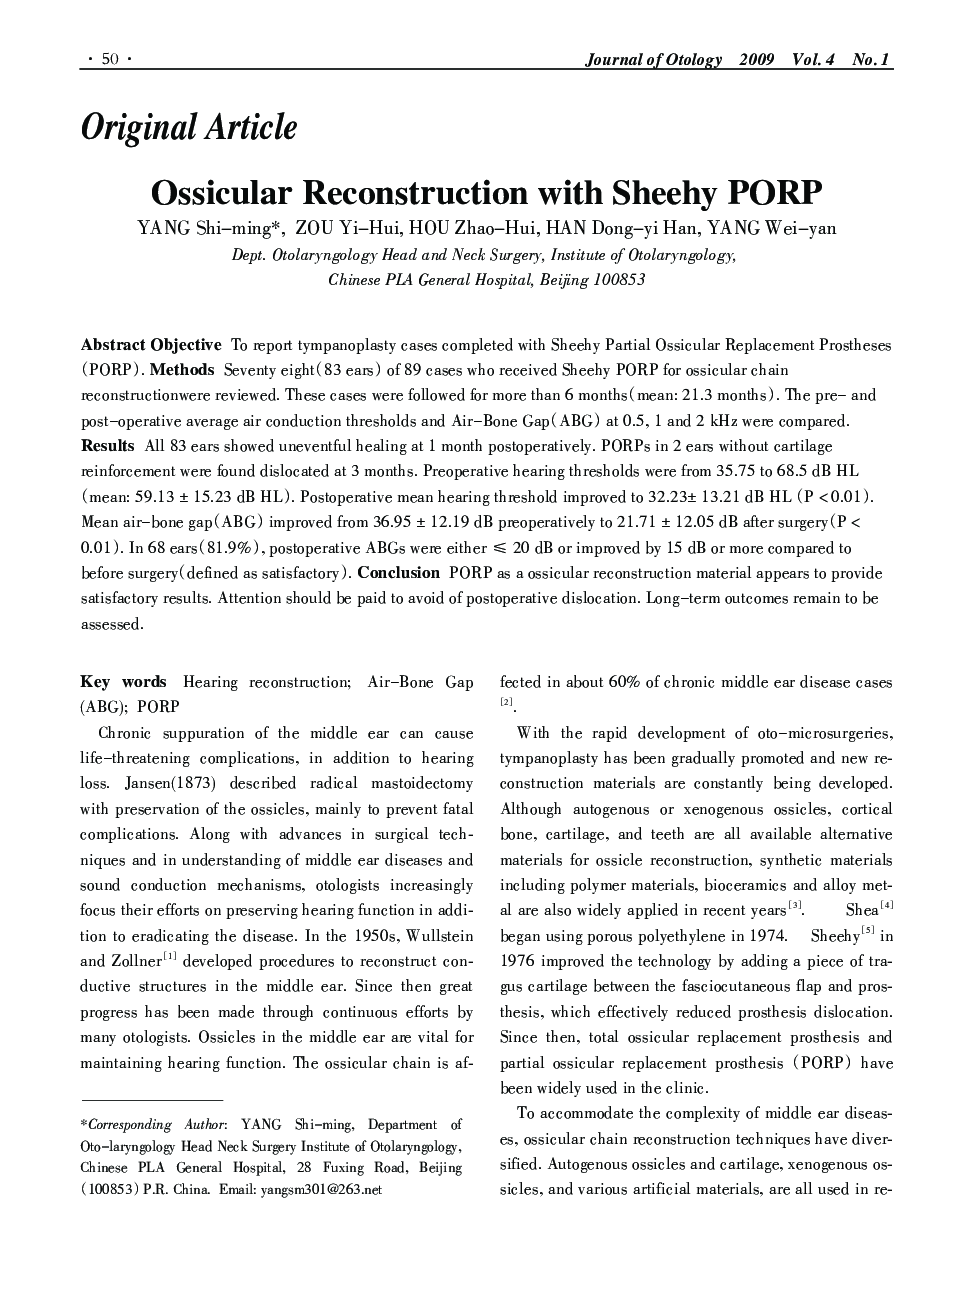 Ossicular Reconstruction with Sheehy PORP